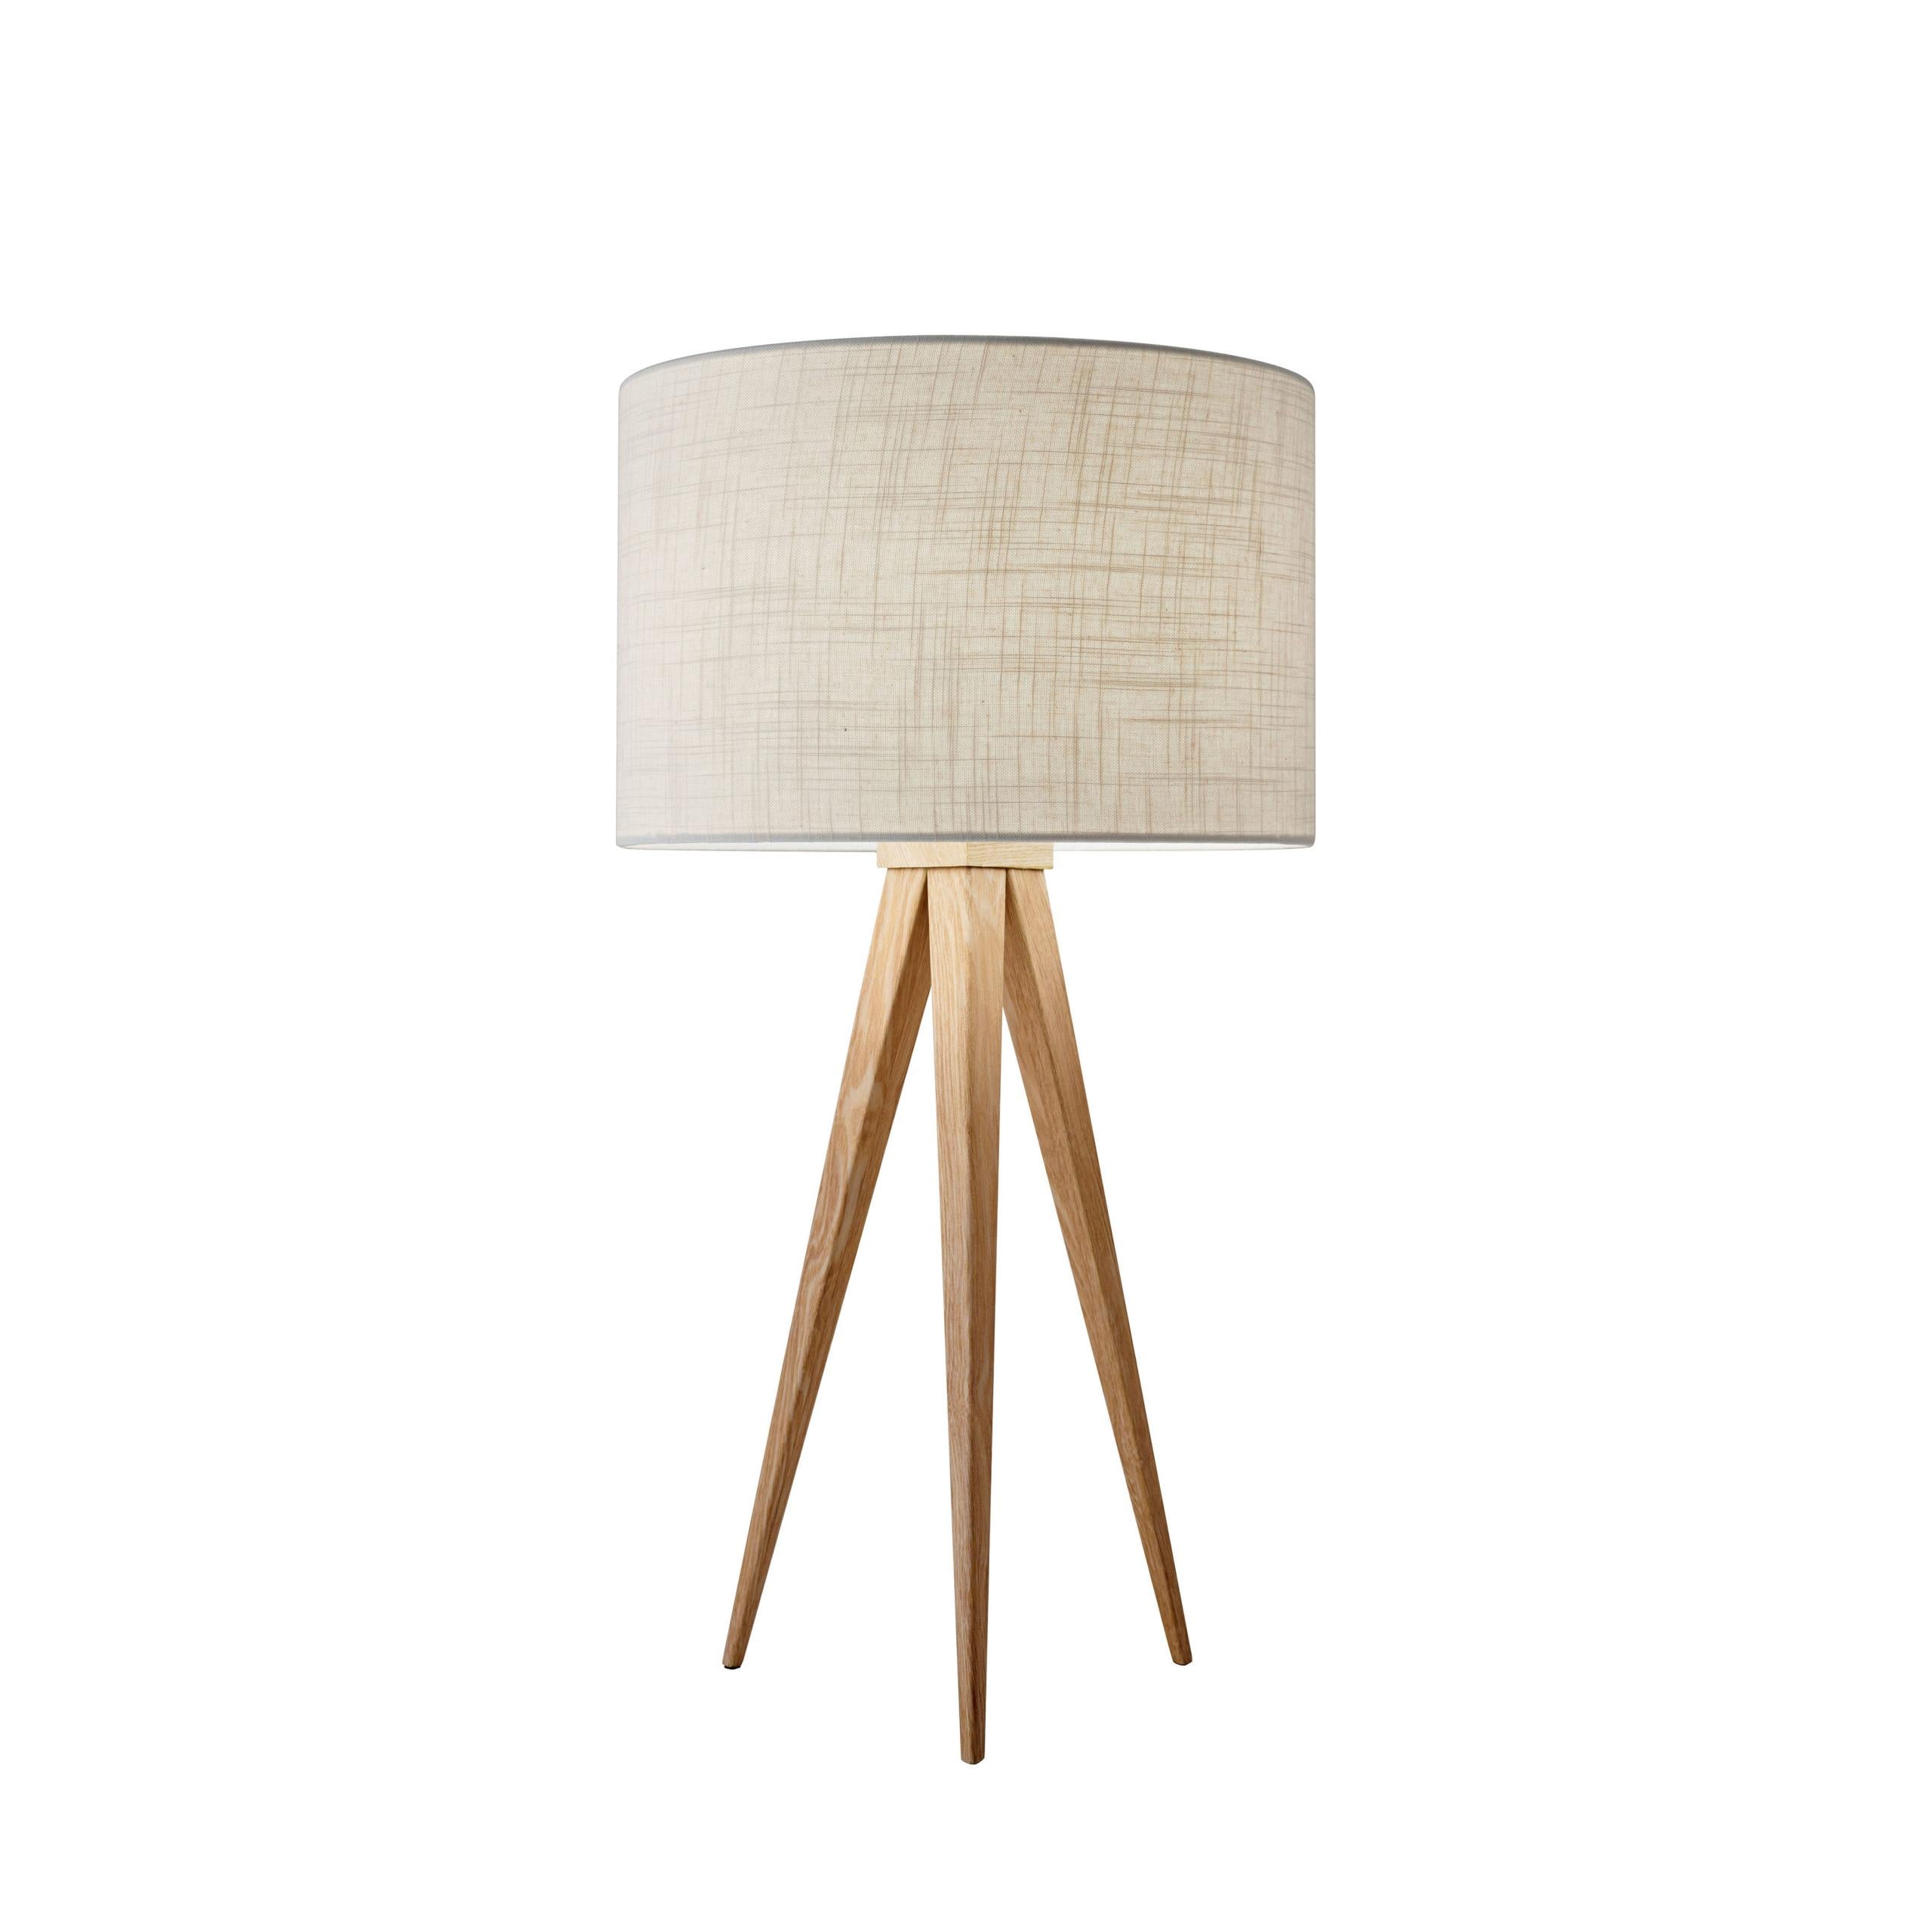 DIRECTOR Table lamp Wood - 6423-12 | ADESSO